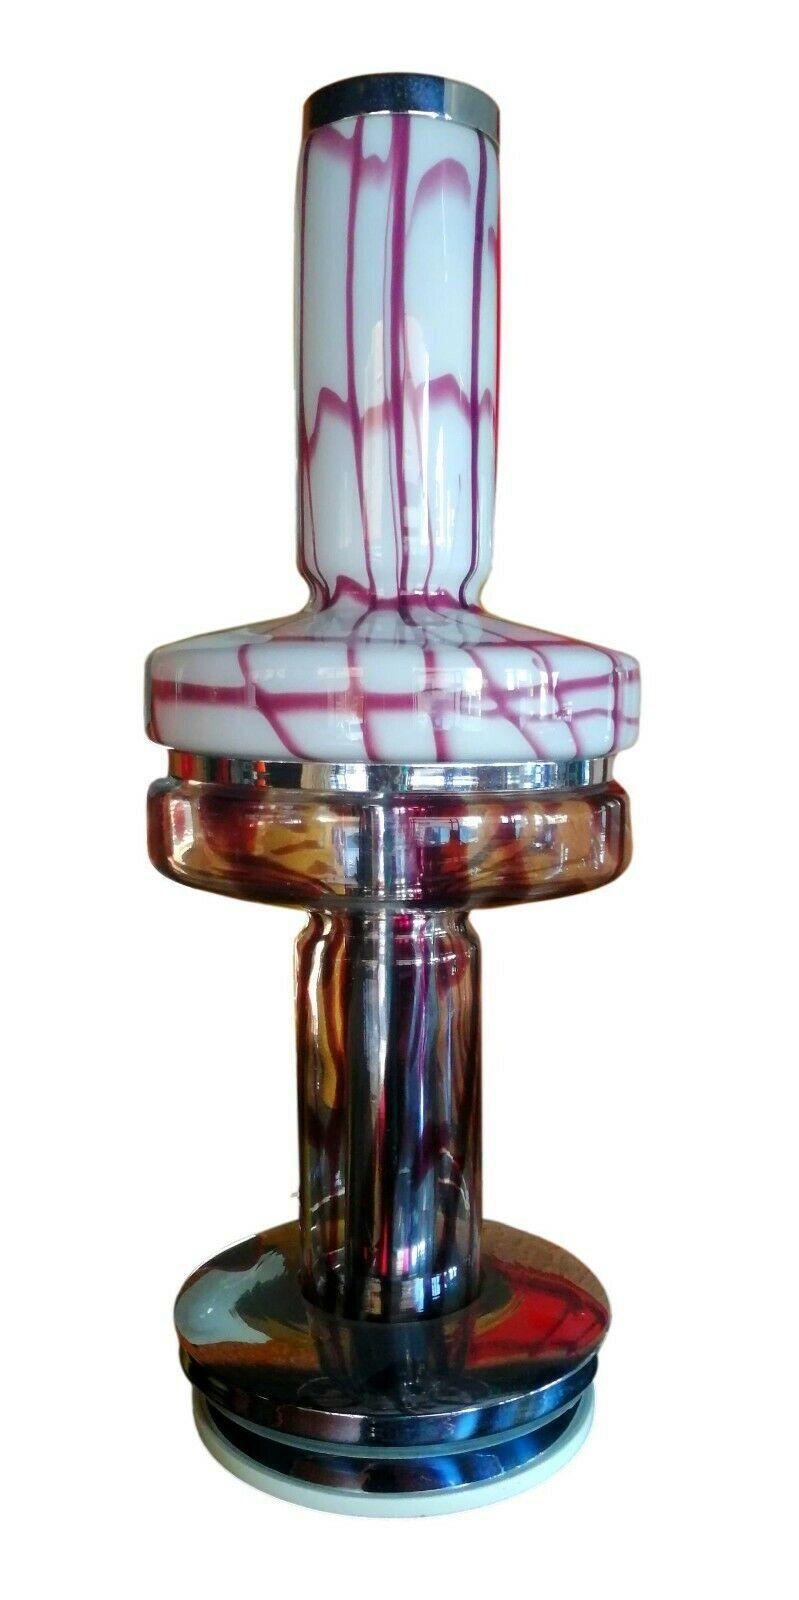 Table or floor lamp, Esperia production based on a design by Angelo Brotto Murano puffed and variegated white and purple

It measures 80 cm in height, in very good storage conditions, as shown in photos, with no cracks, chips or missing parts.